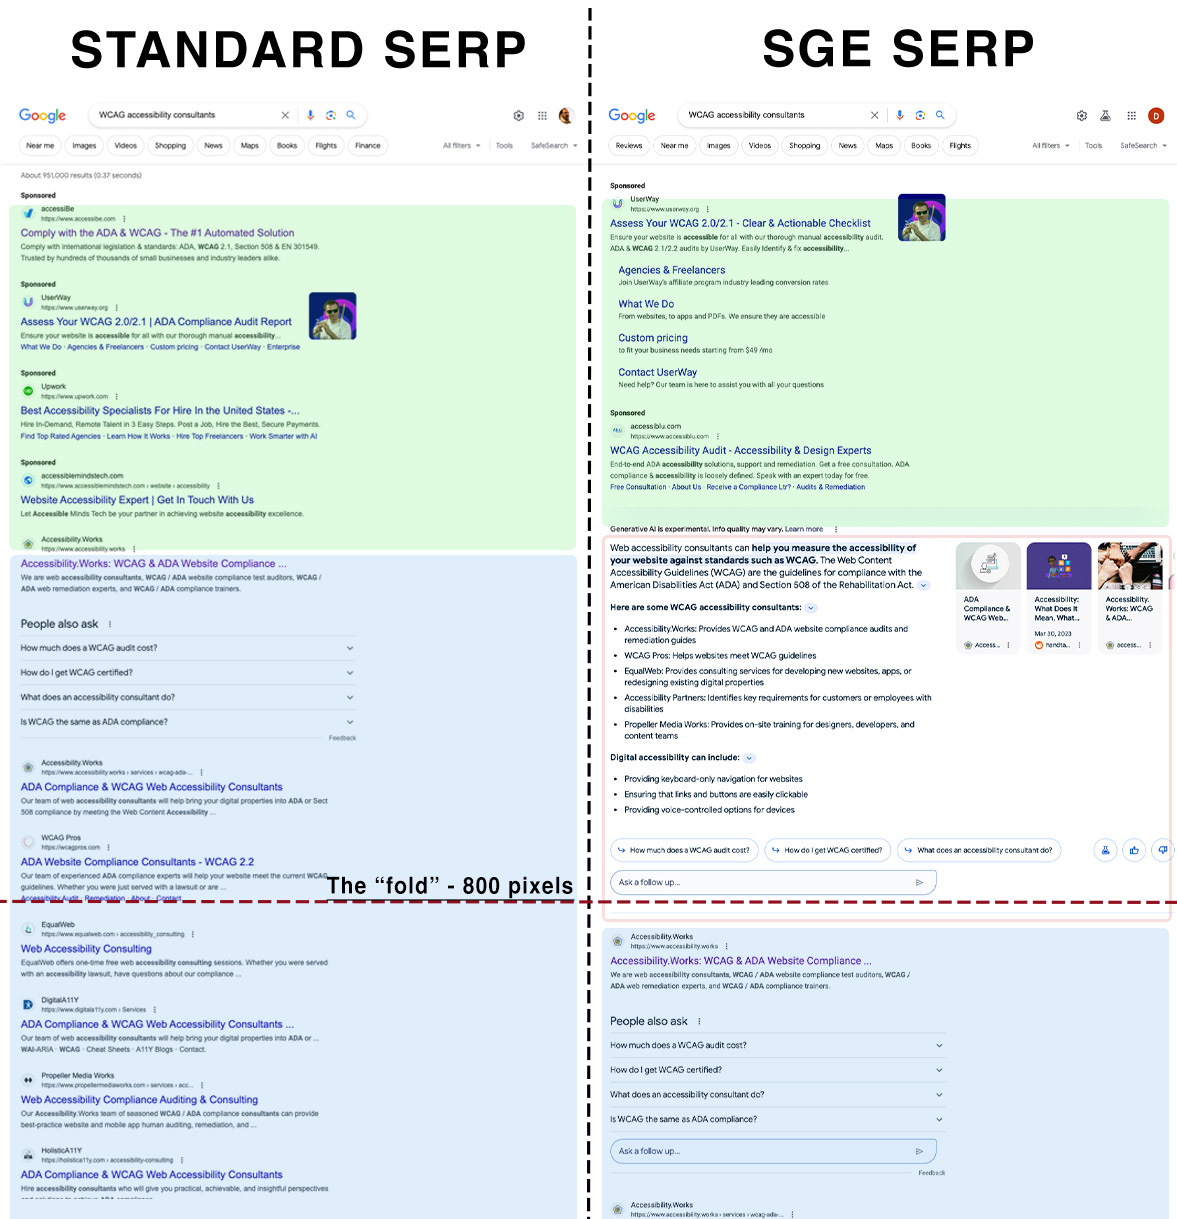 Comparative between standard SERP and new Google SGE SERP results